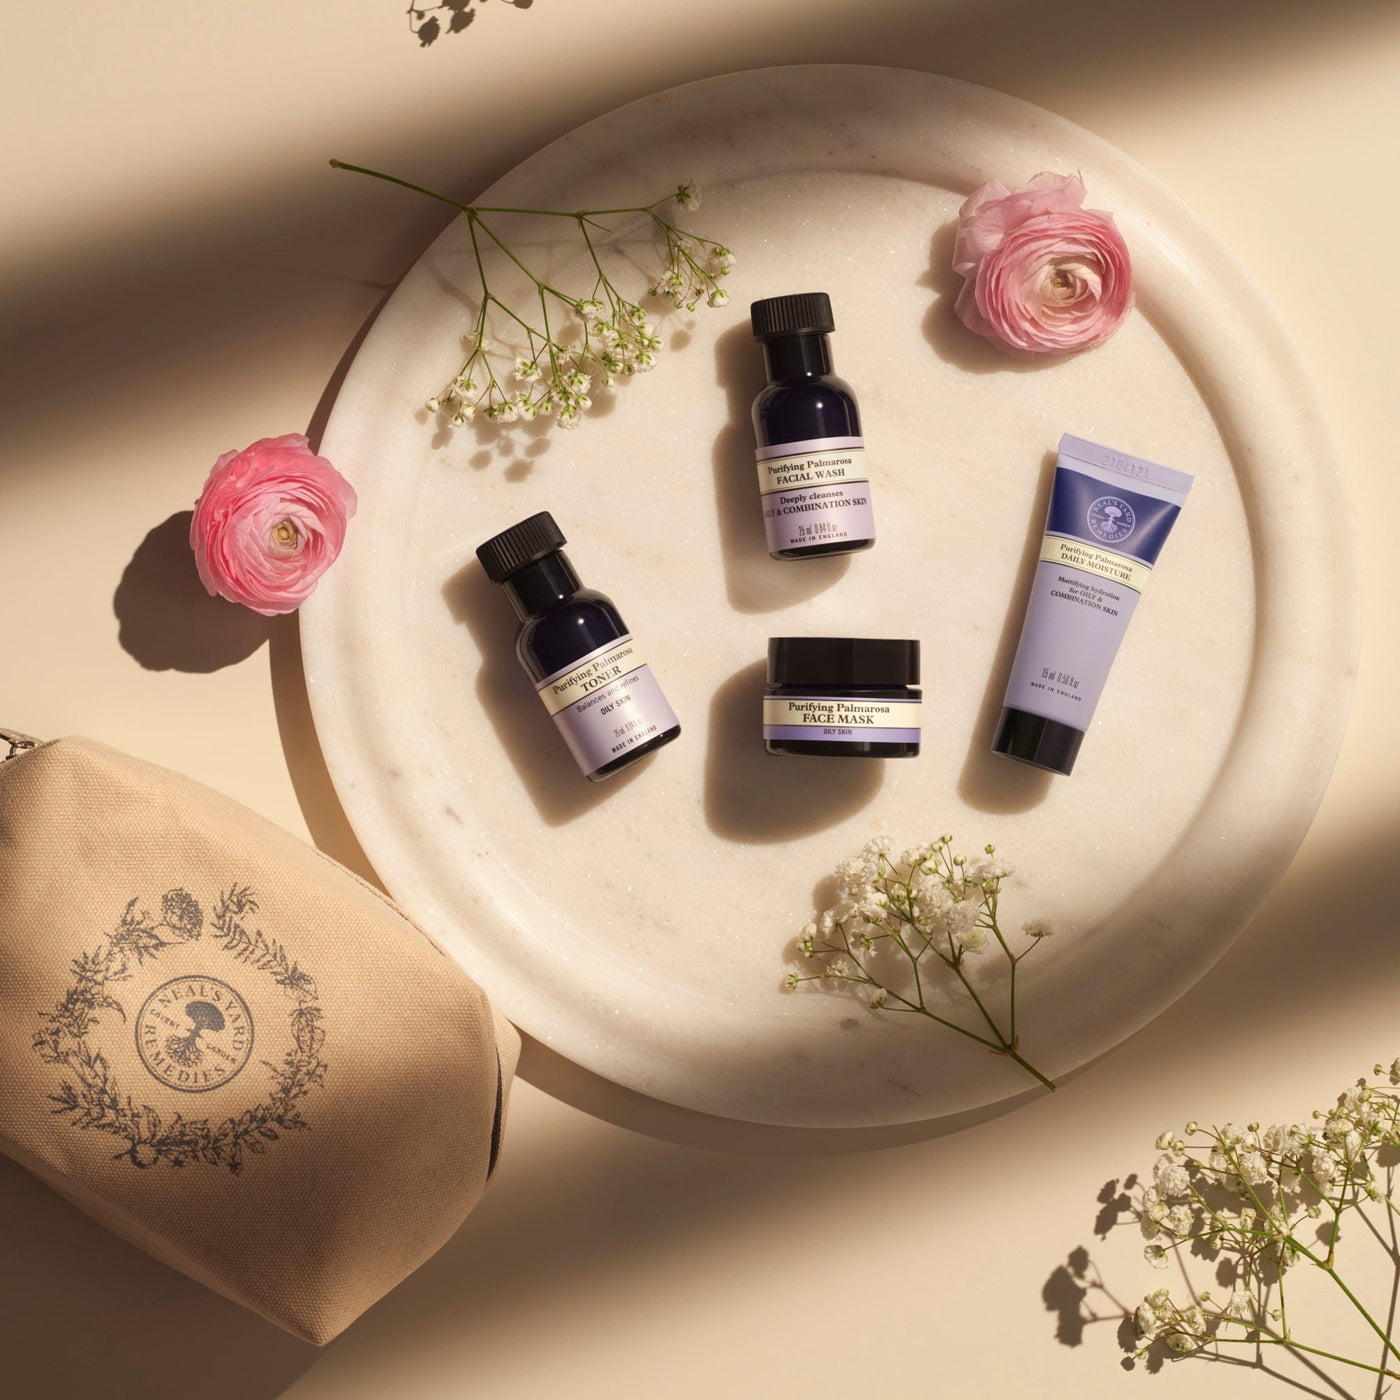 Neal's Yard Remedies Gifts & Collections Purifying Palmarosa Skincare Kit